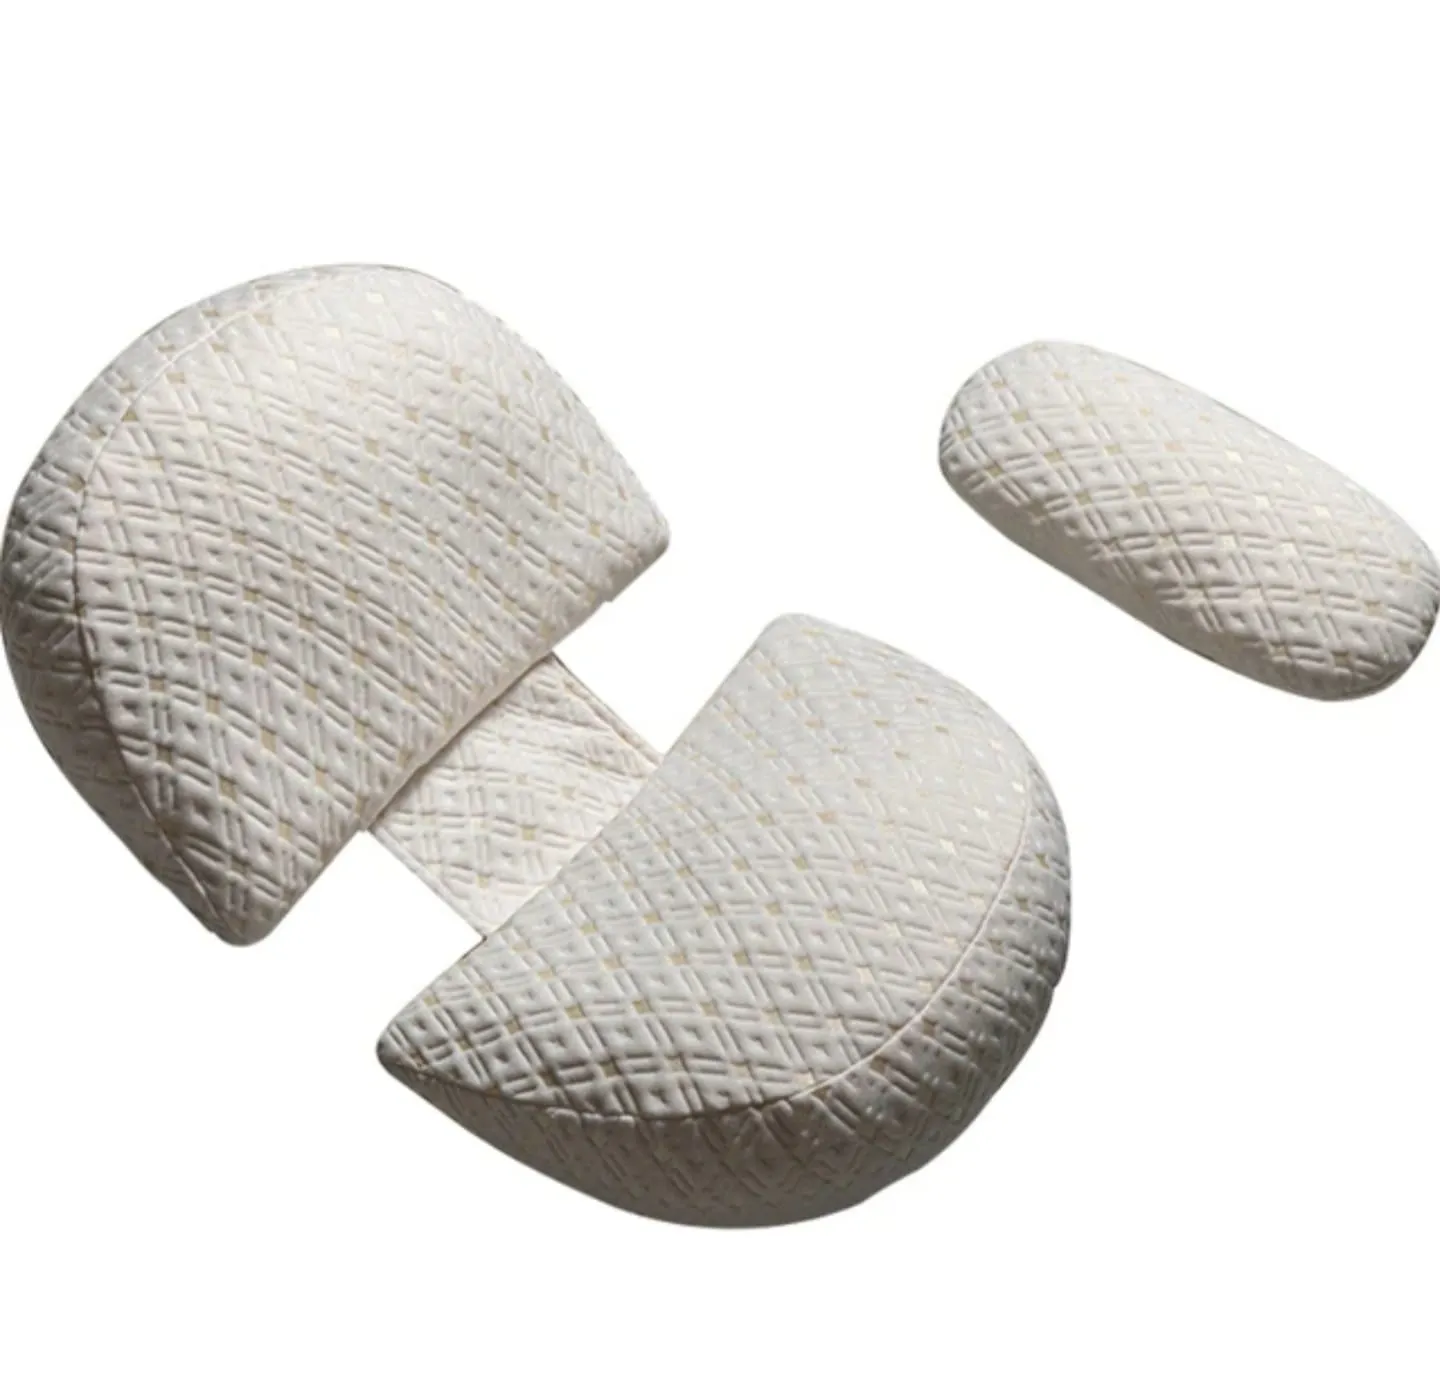 U-Shaped Pregnancy Pillow for Pregnant Wedge Pillow for Belly Back Hips Legs Support Adjustable Detachable Belly Pillow